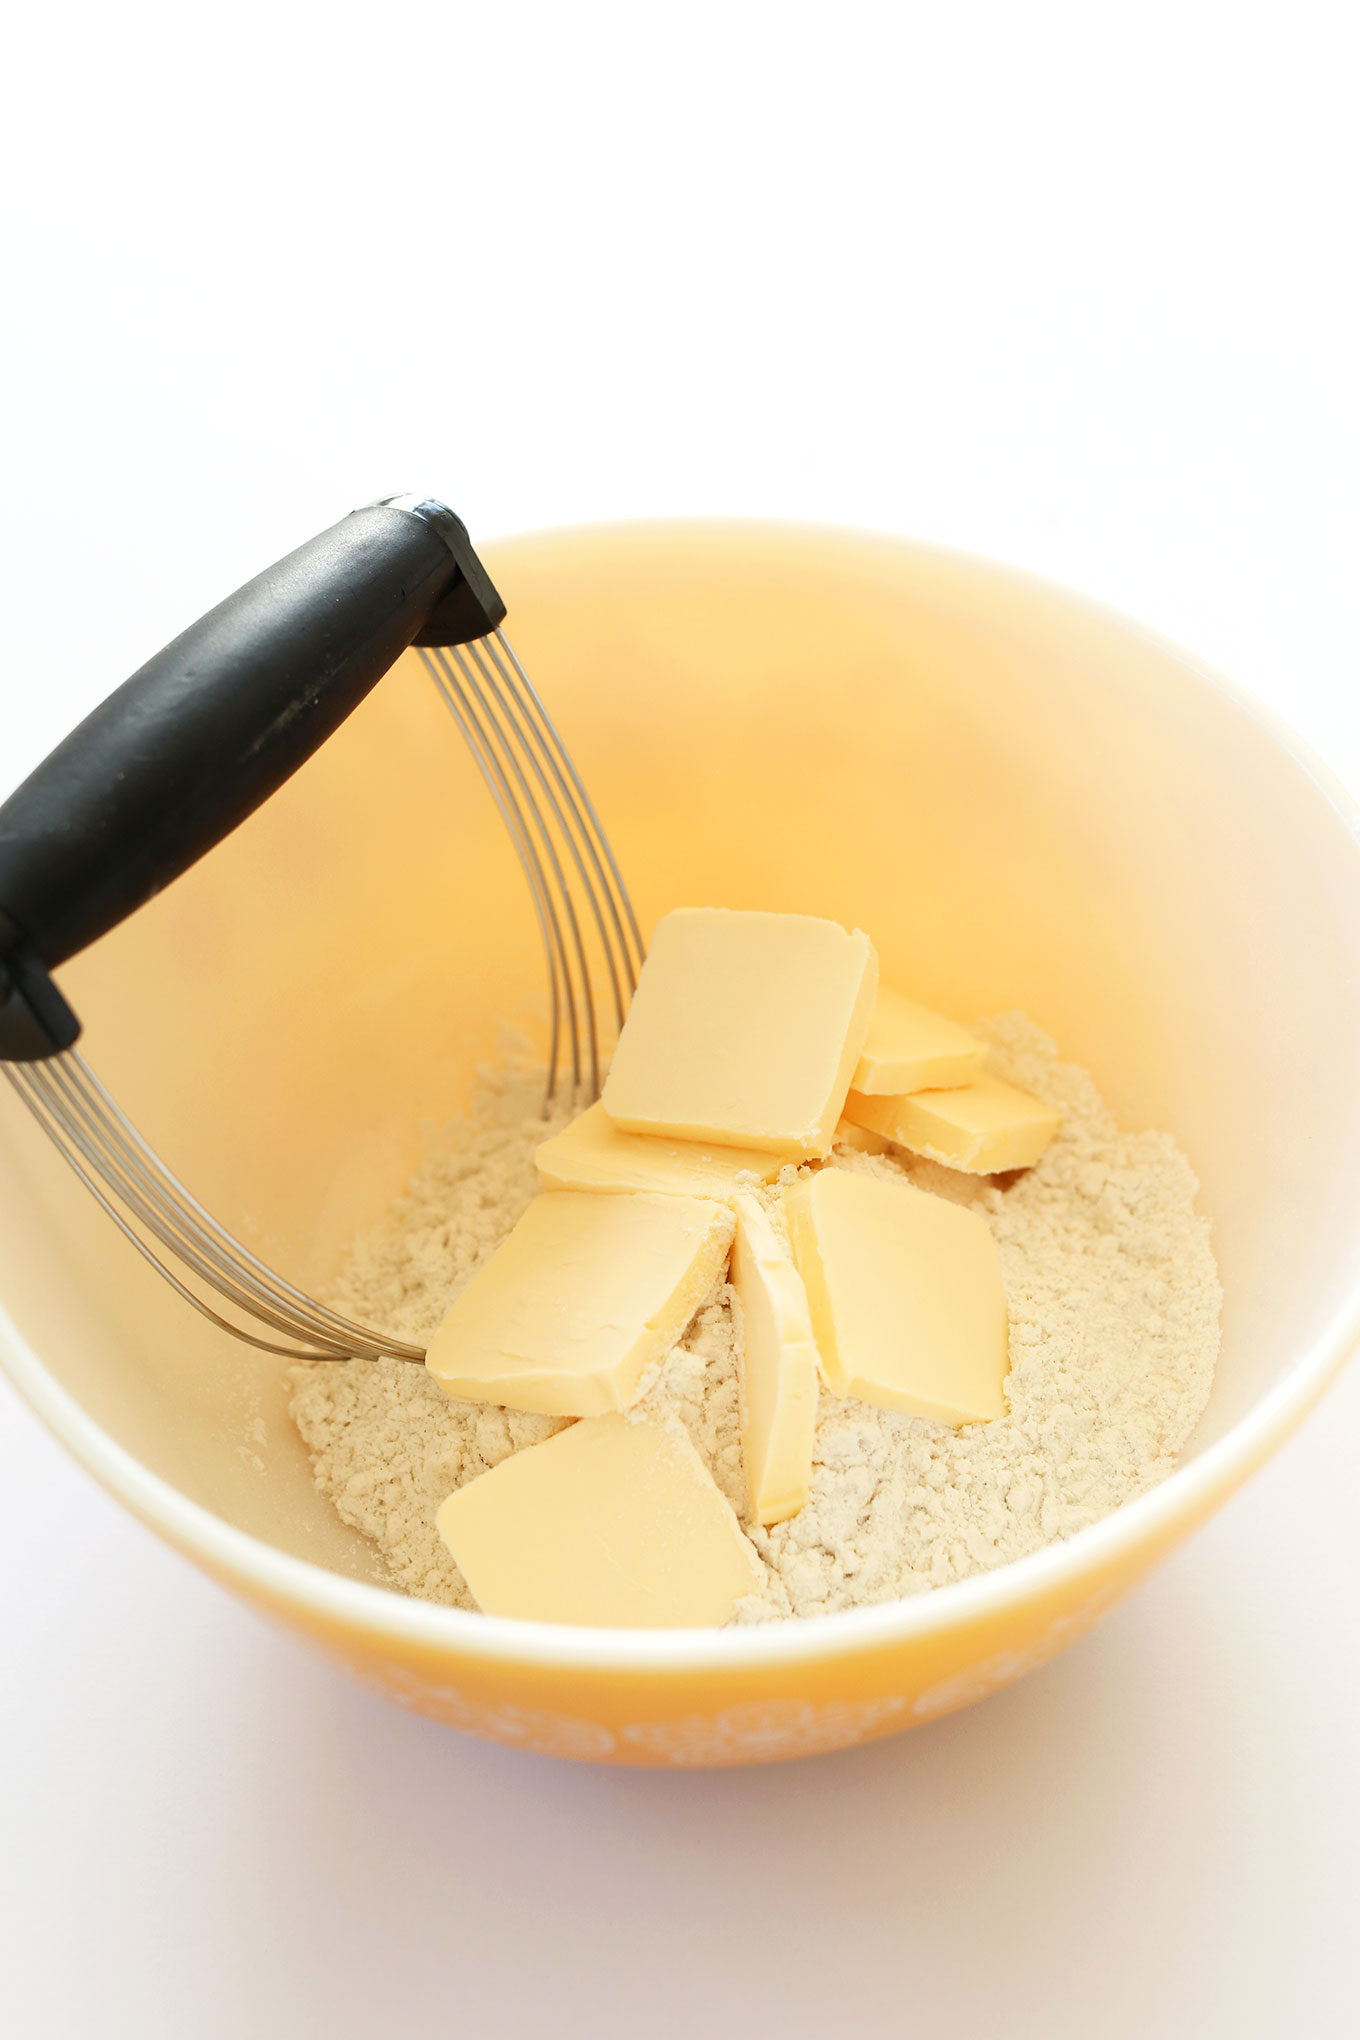 Pastry cutter to in a bowl with gluten-free flour and slices of vegan butter